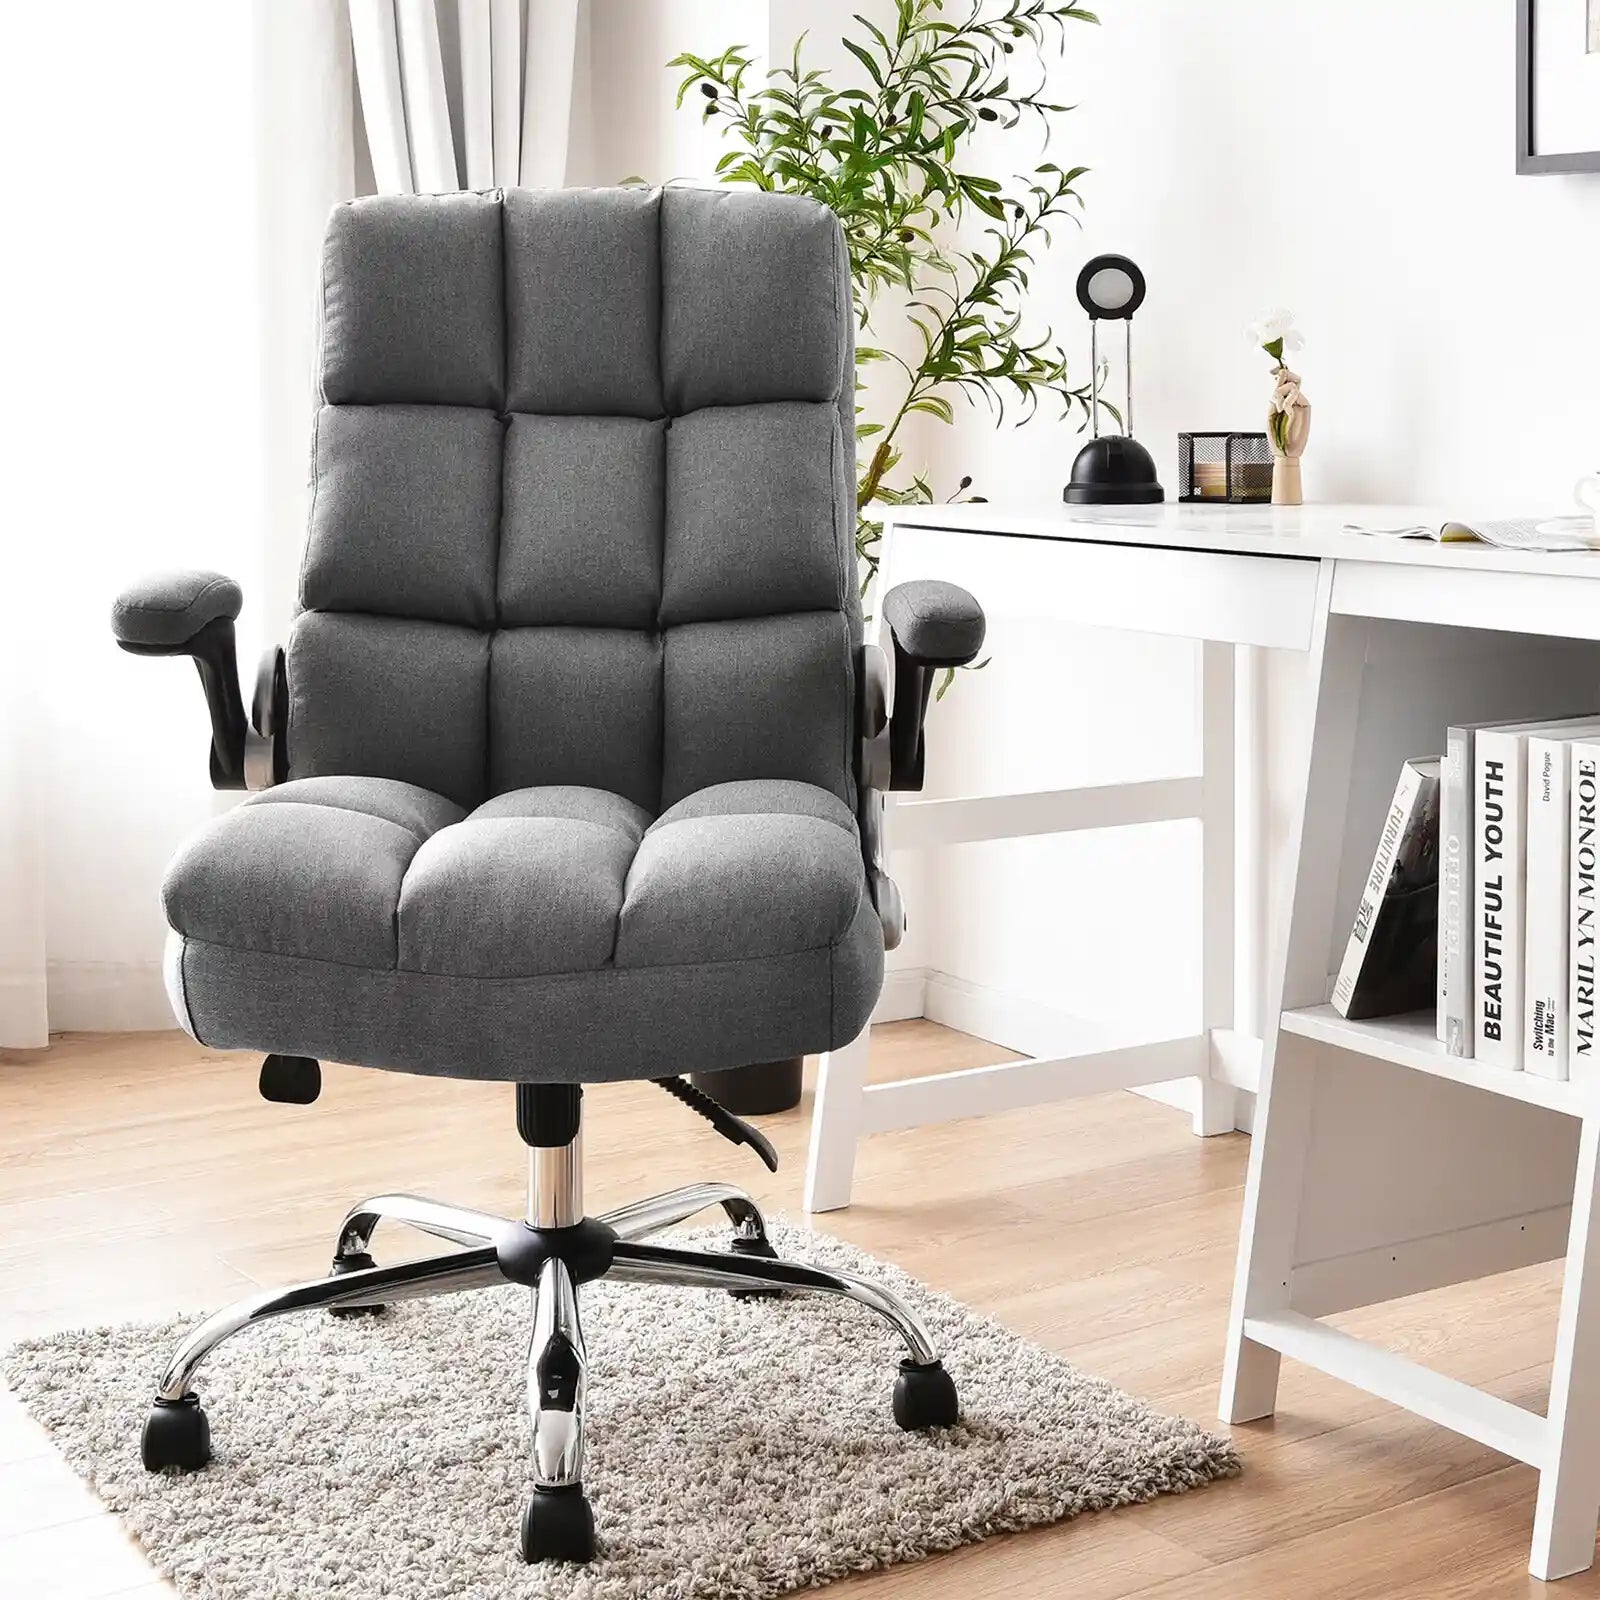 High Back Big & Tall Office Chair Adjustable Swivel with Flip-up Arm